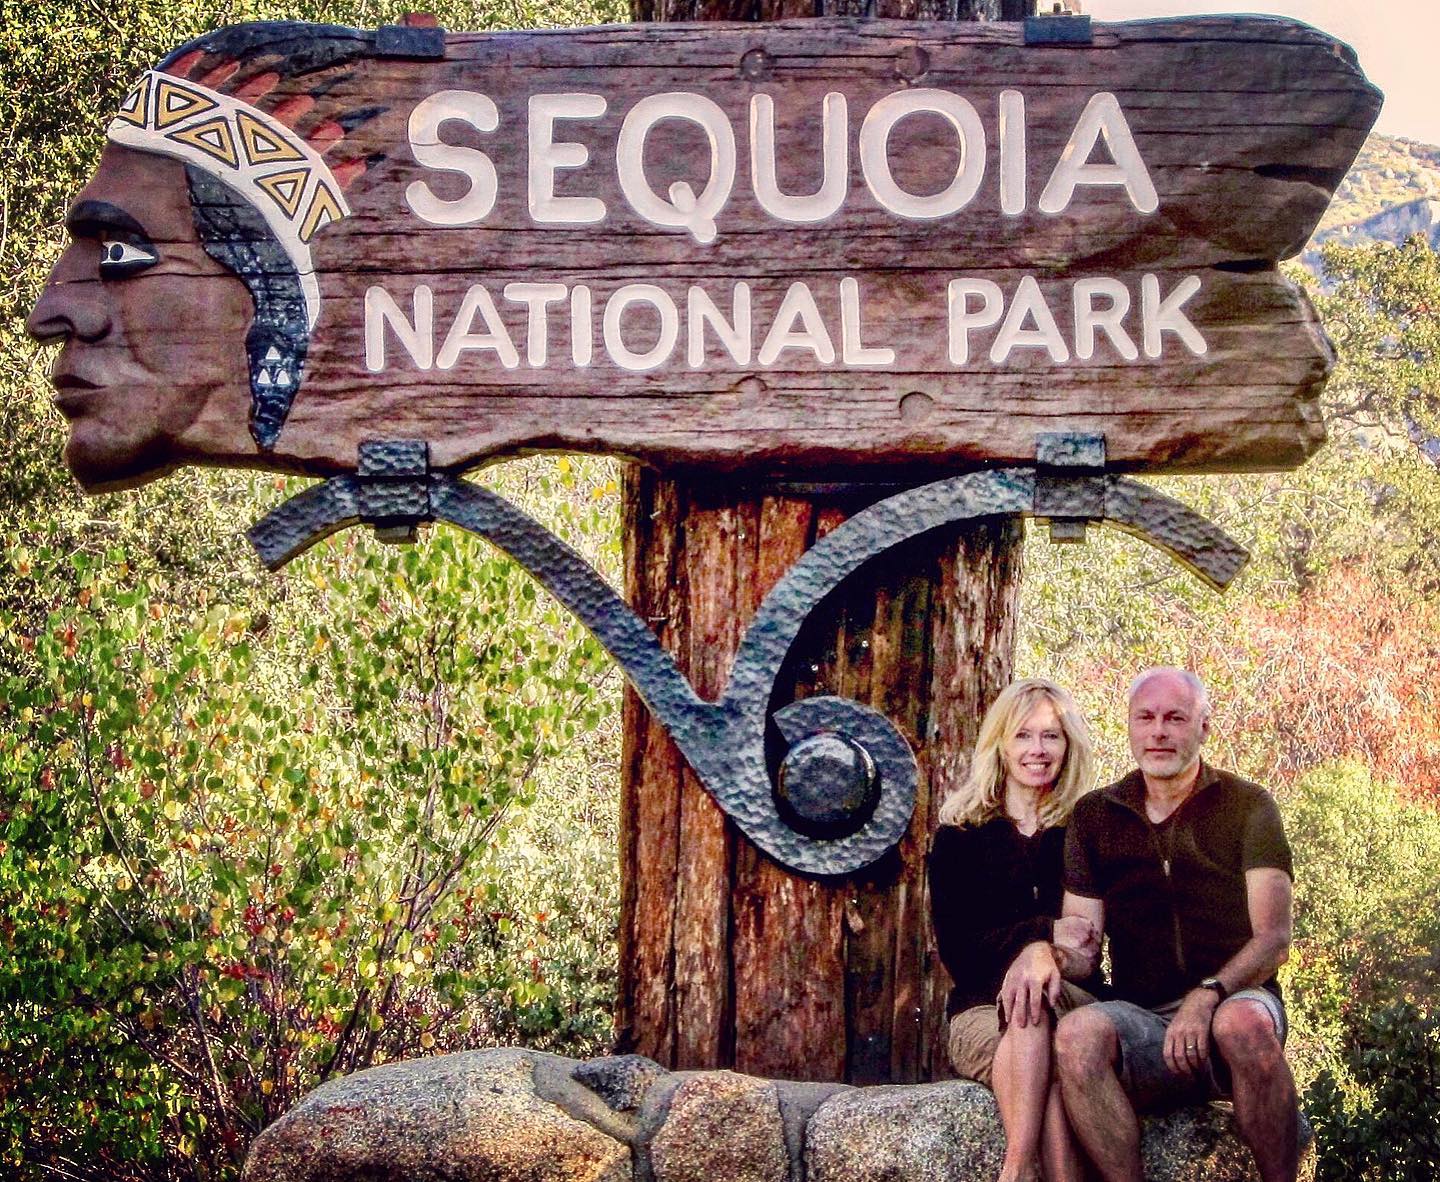 Do you take your picture in front of the park entrance signs? 

Every time we see people next to an entrance sign posing for a photo, it makes us smile, remembering all the park sign photos that we took with a timer and our camera balanced on a box of Cheez-Its. Aside from this Sequoia photo (our favorite park sign), the pictures are mostly crooked and out of focus, with at least one of us blinking, squinting or looking awkward. Nonetheless, they might just be our favorite photos from our journey to all the parks.

#nationalparkweek